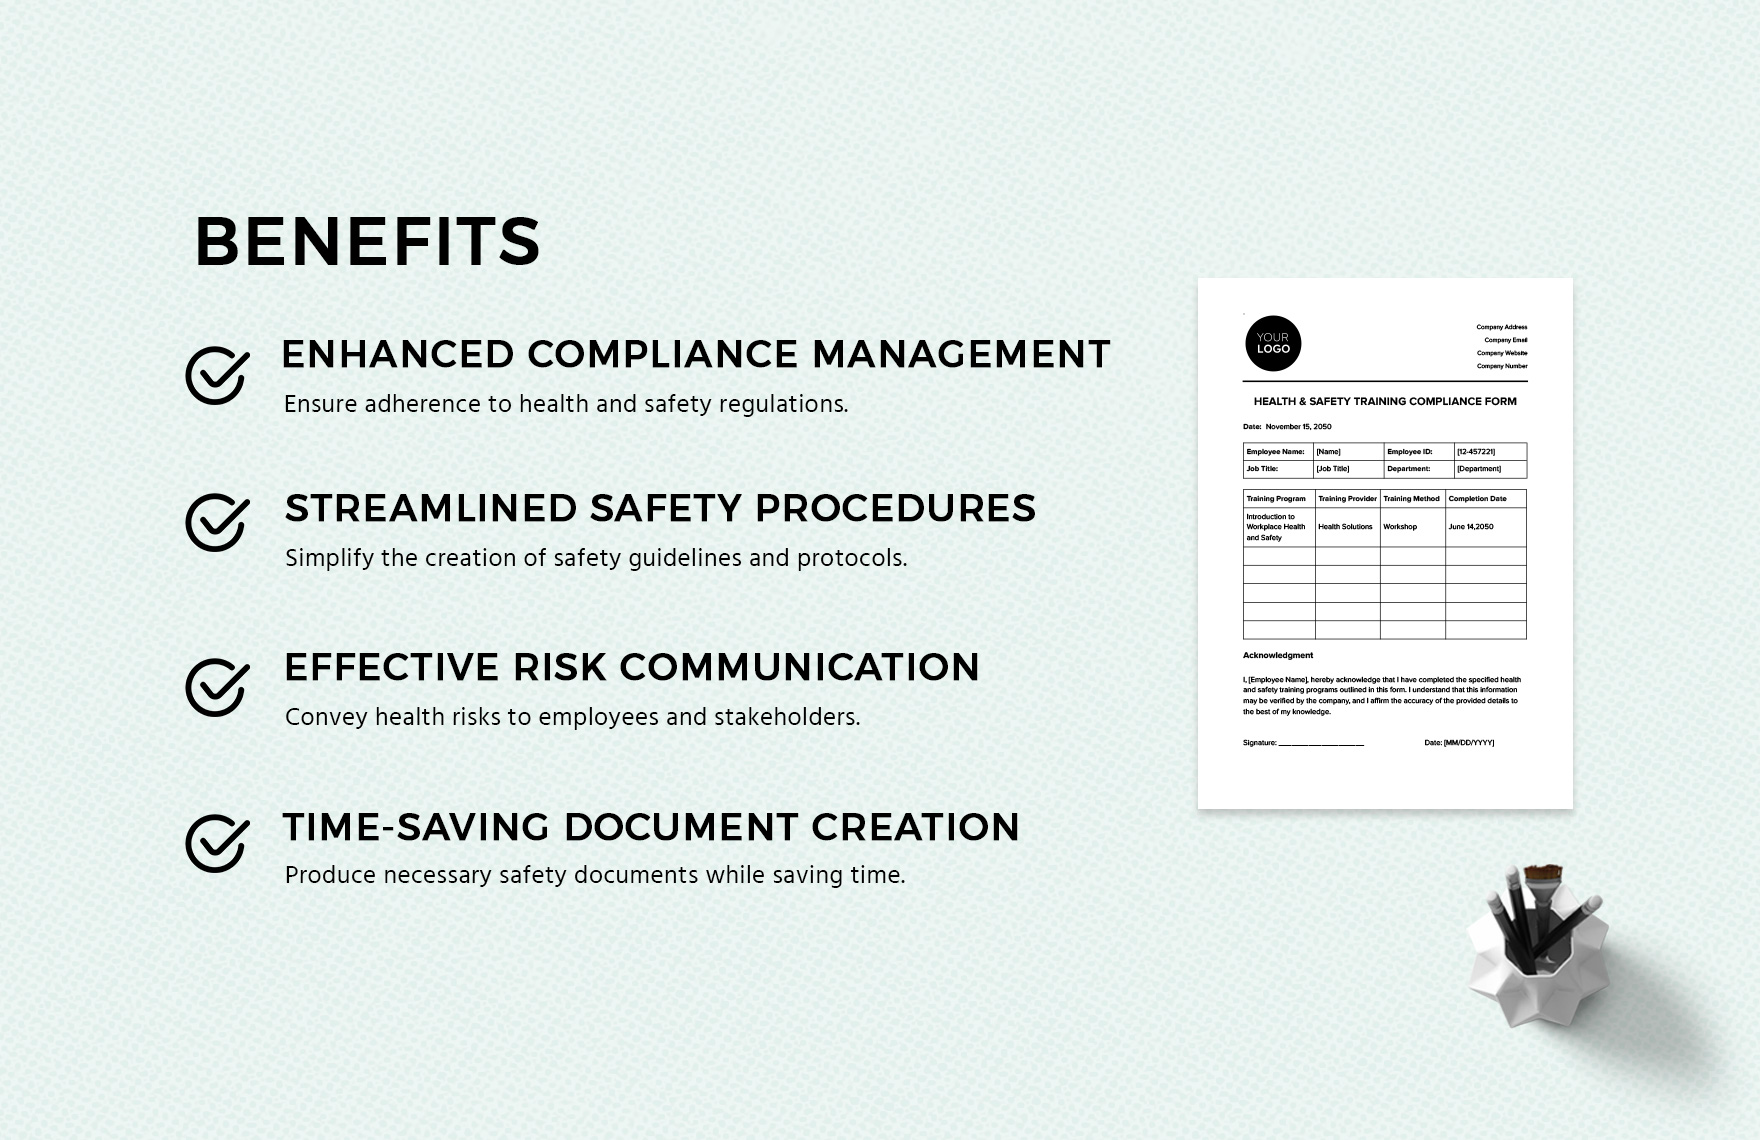 Health & Safety Training Compliance Form Template